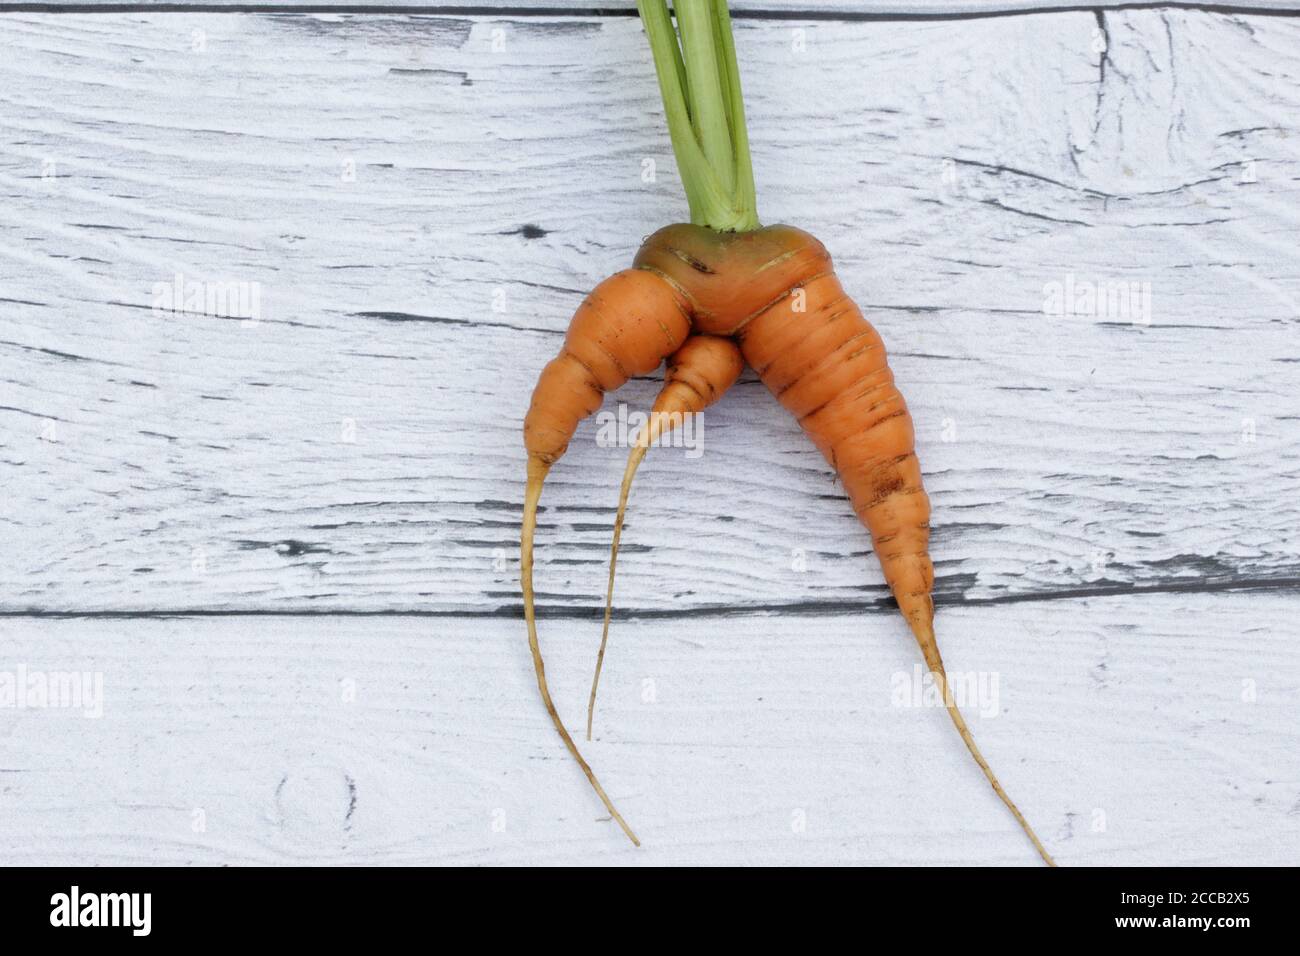 Ugly trendy organic deformed vegetable carrot on the wooden background Stock Photo